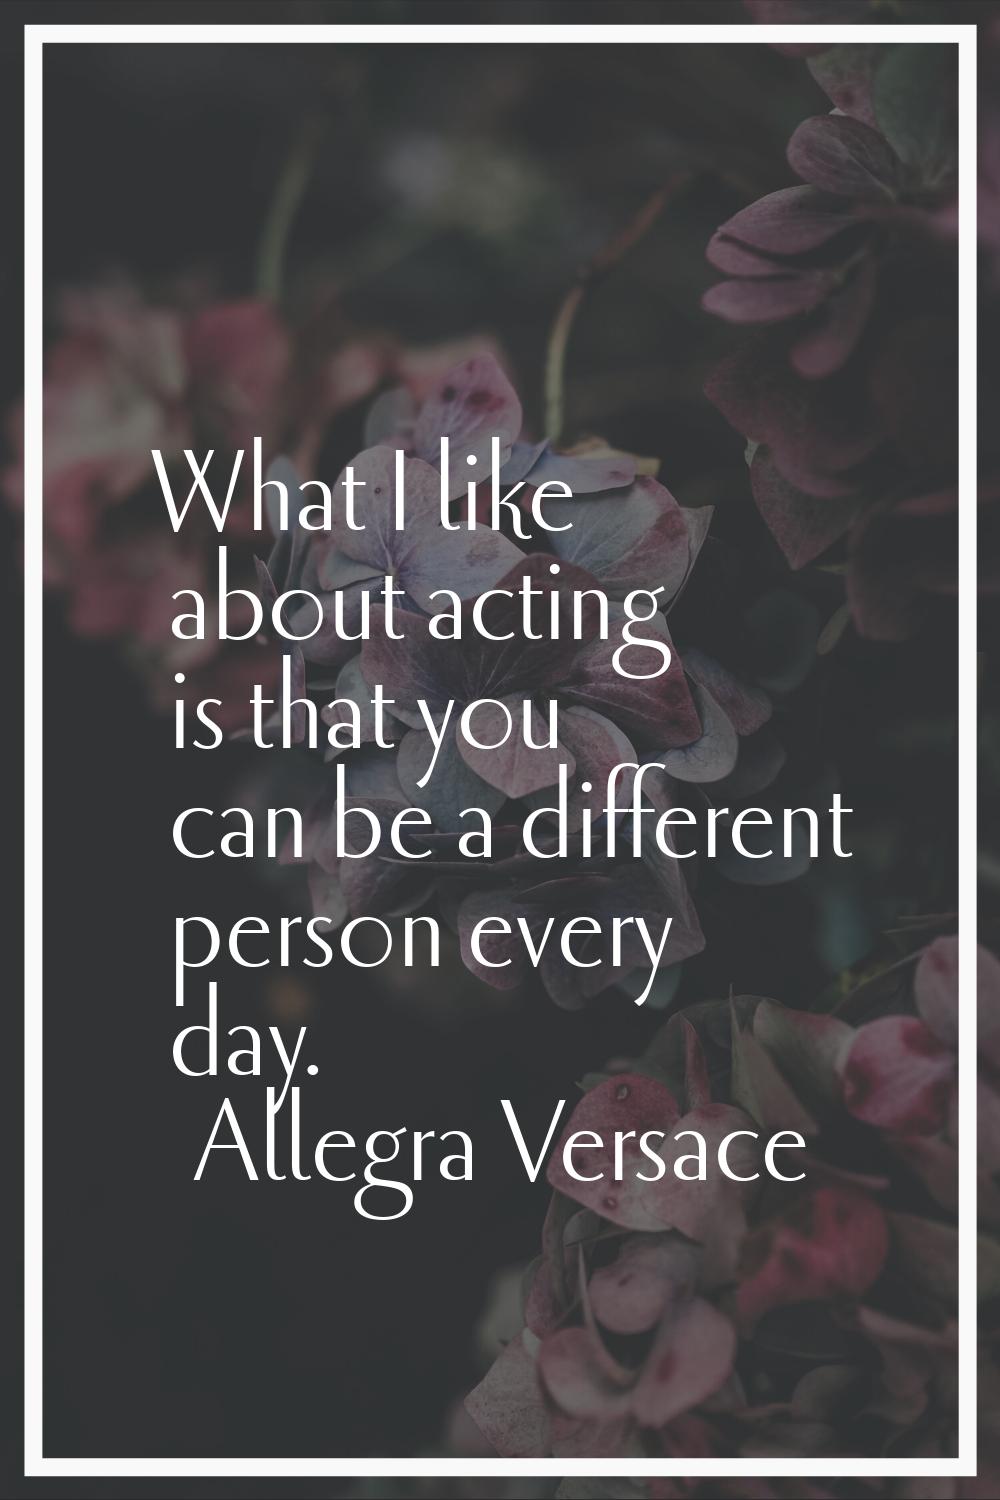 What I like about acting is that you can be a different person every day.